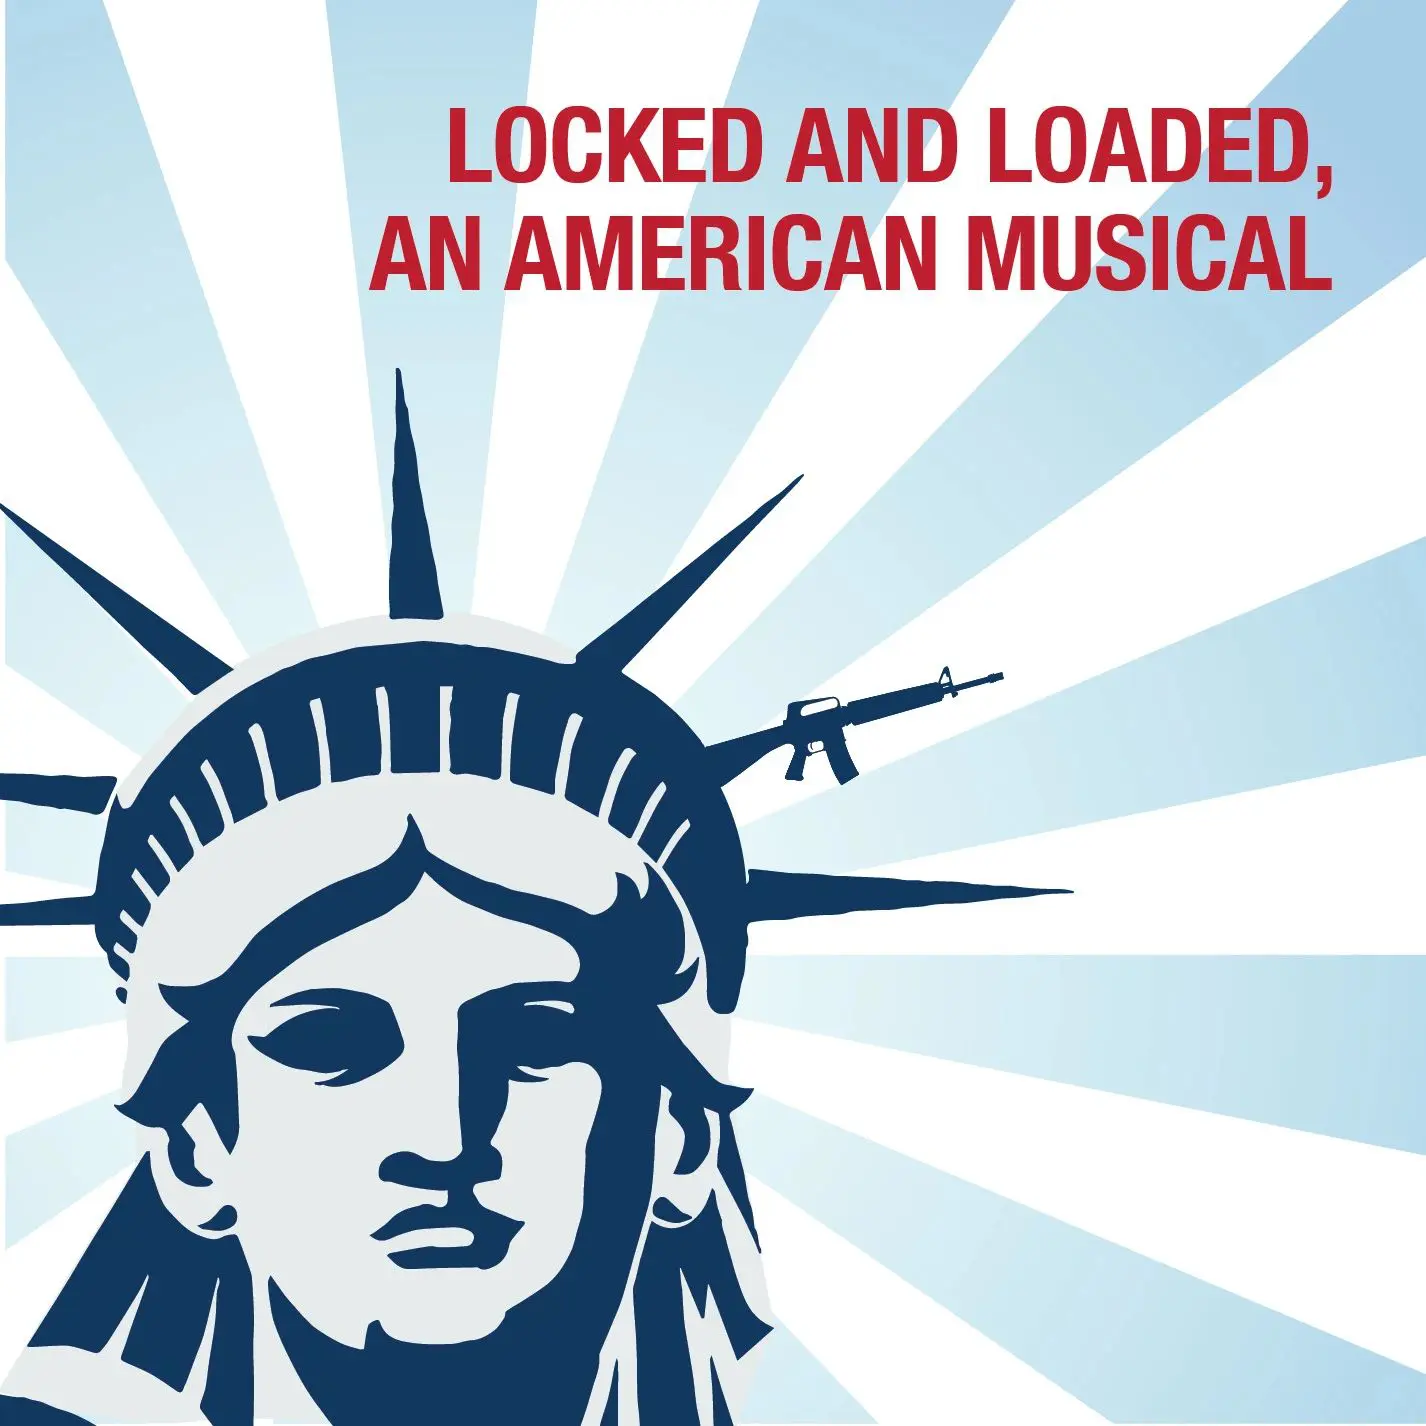 Locked and Loaded, an American Musical